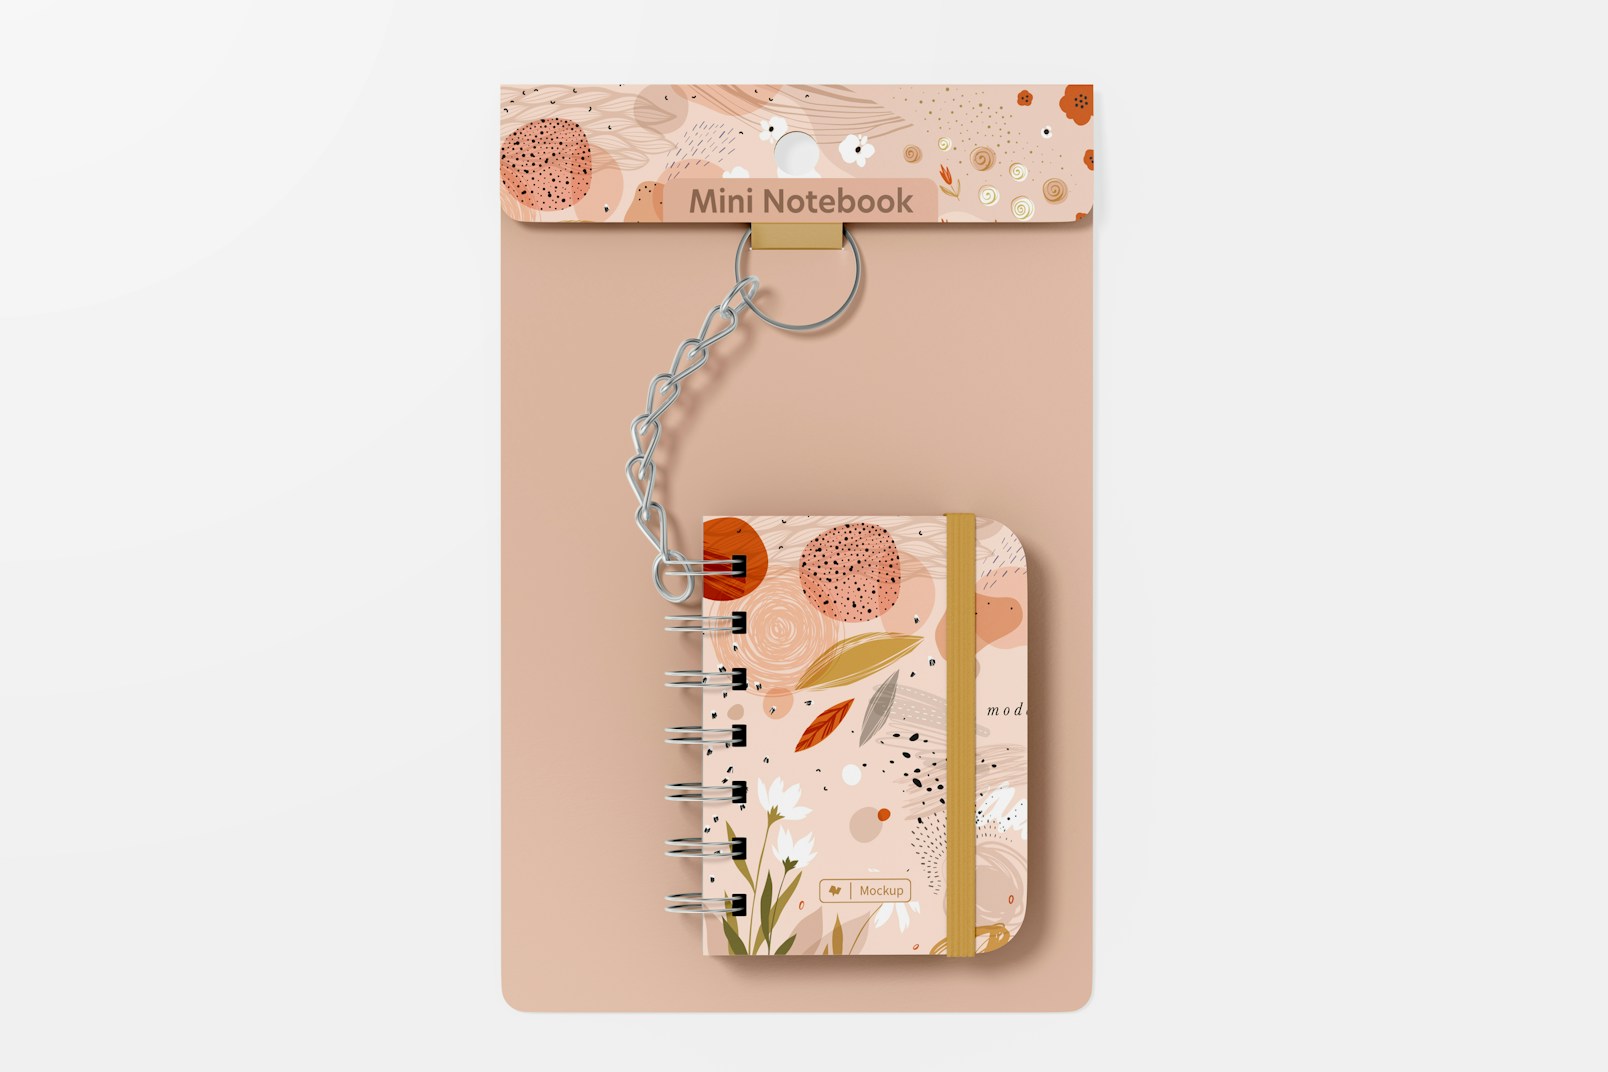 Mini Notebook with Keychain Mockup, Top View